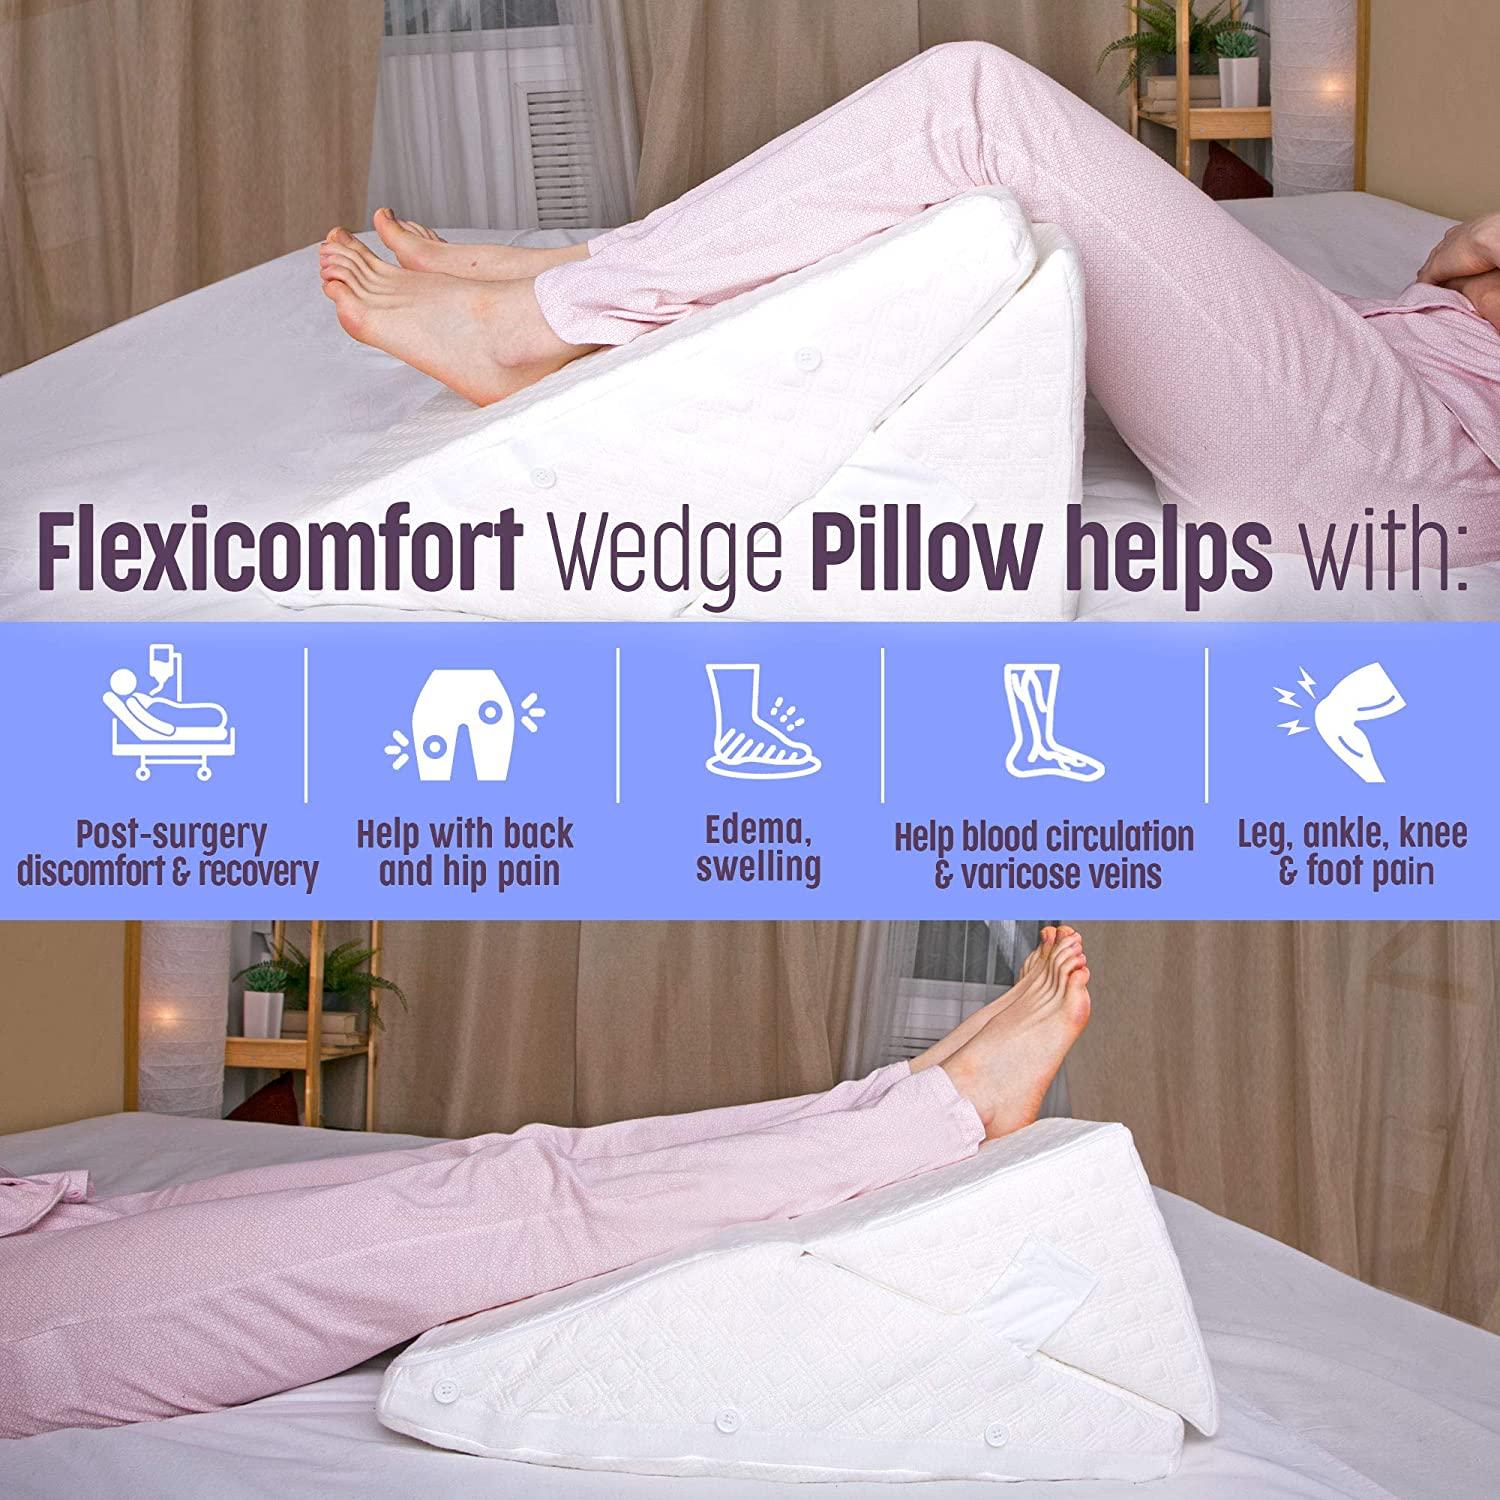 How to Use a Wedge Pillow after Hip Replacement? 